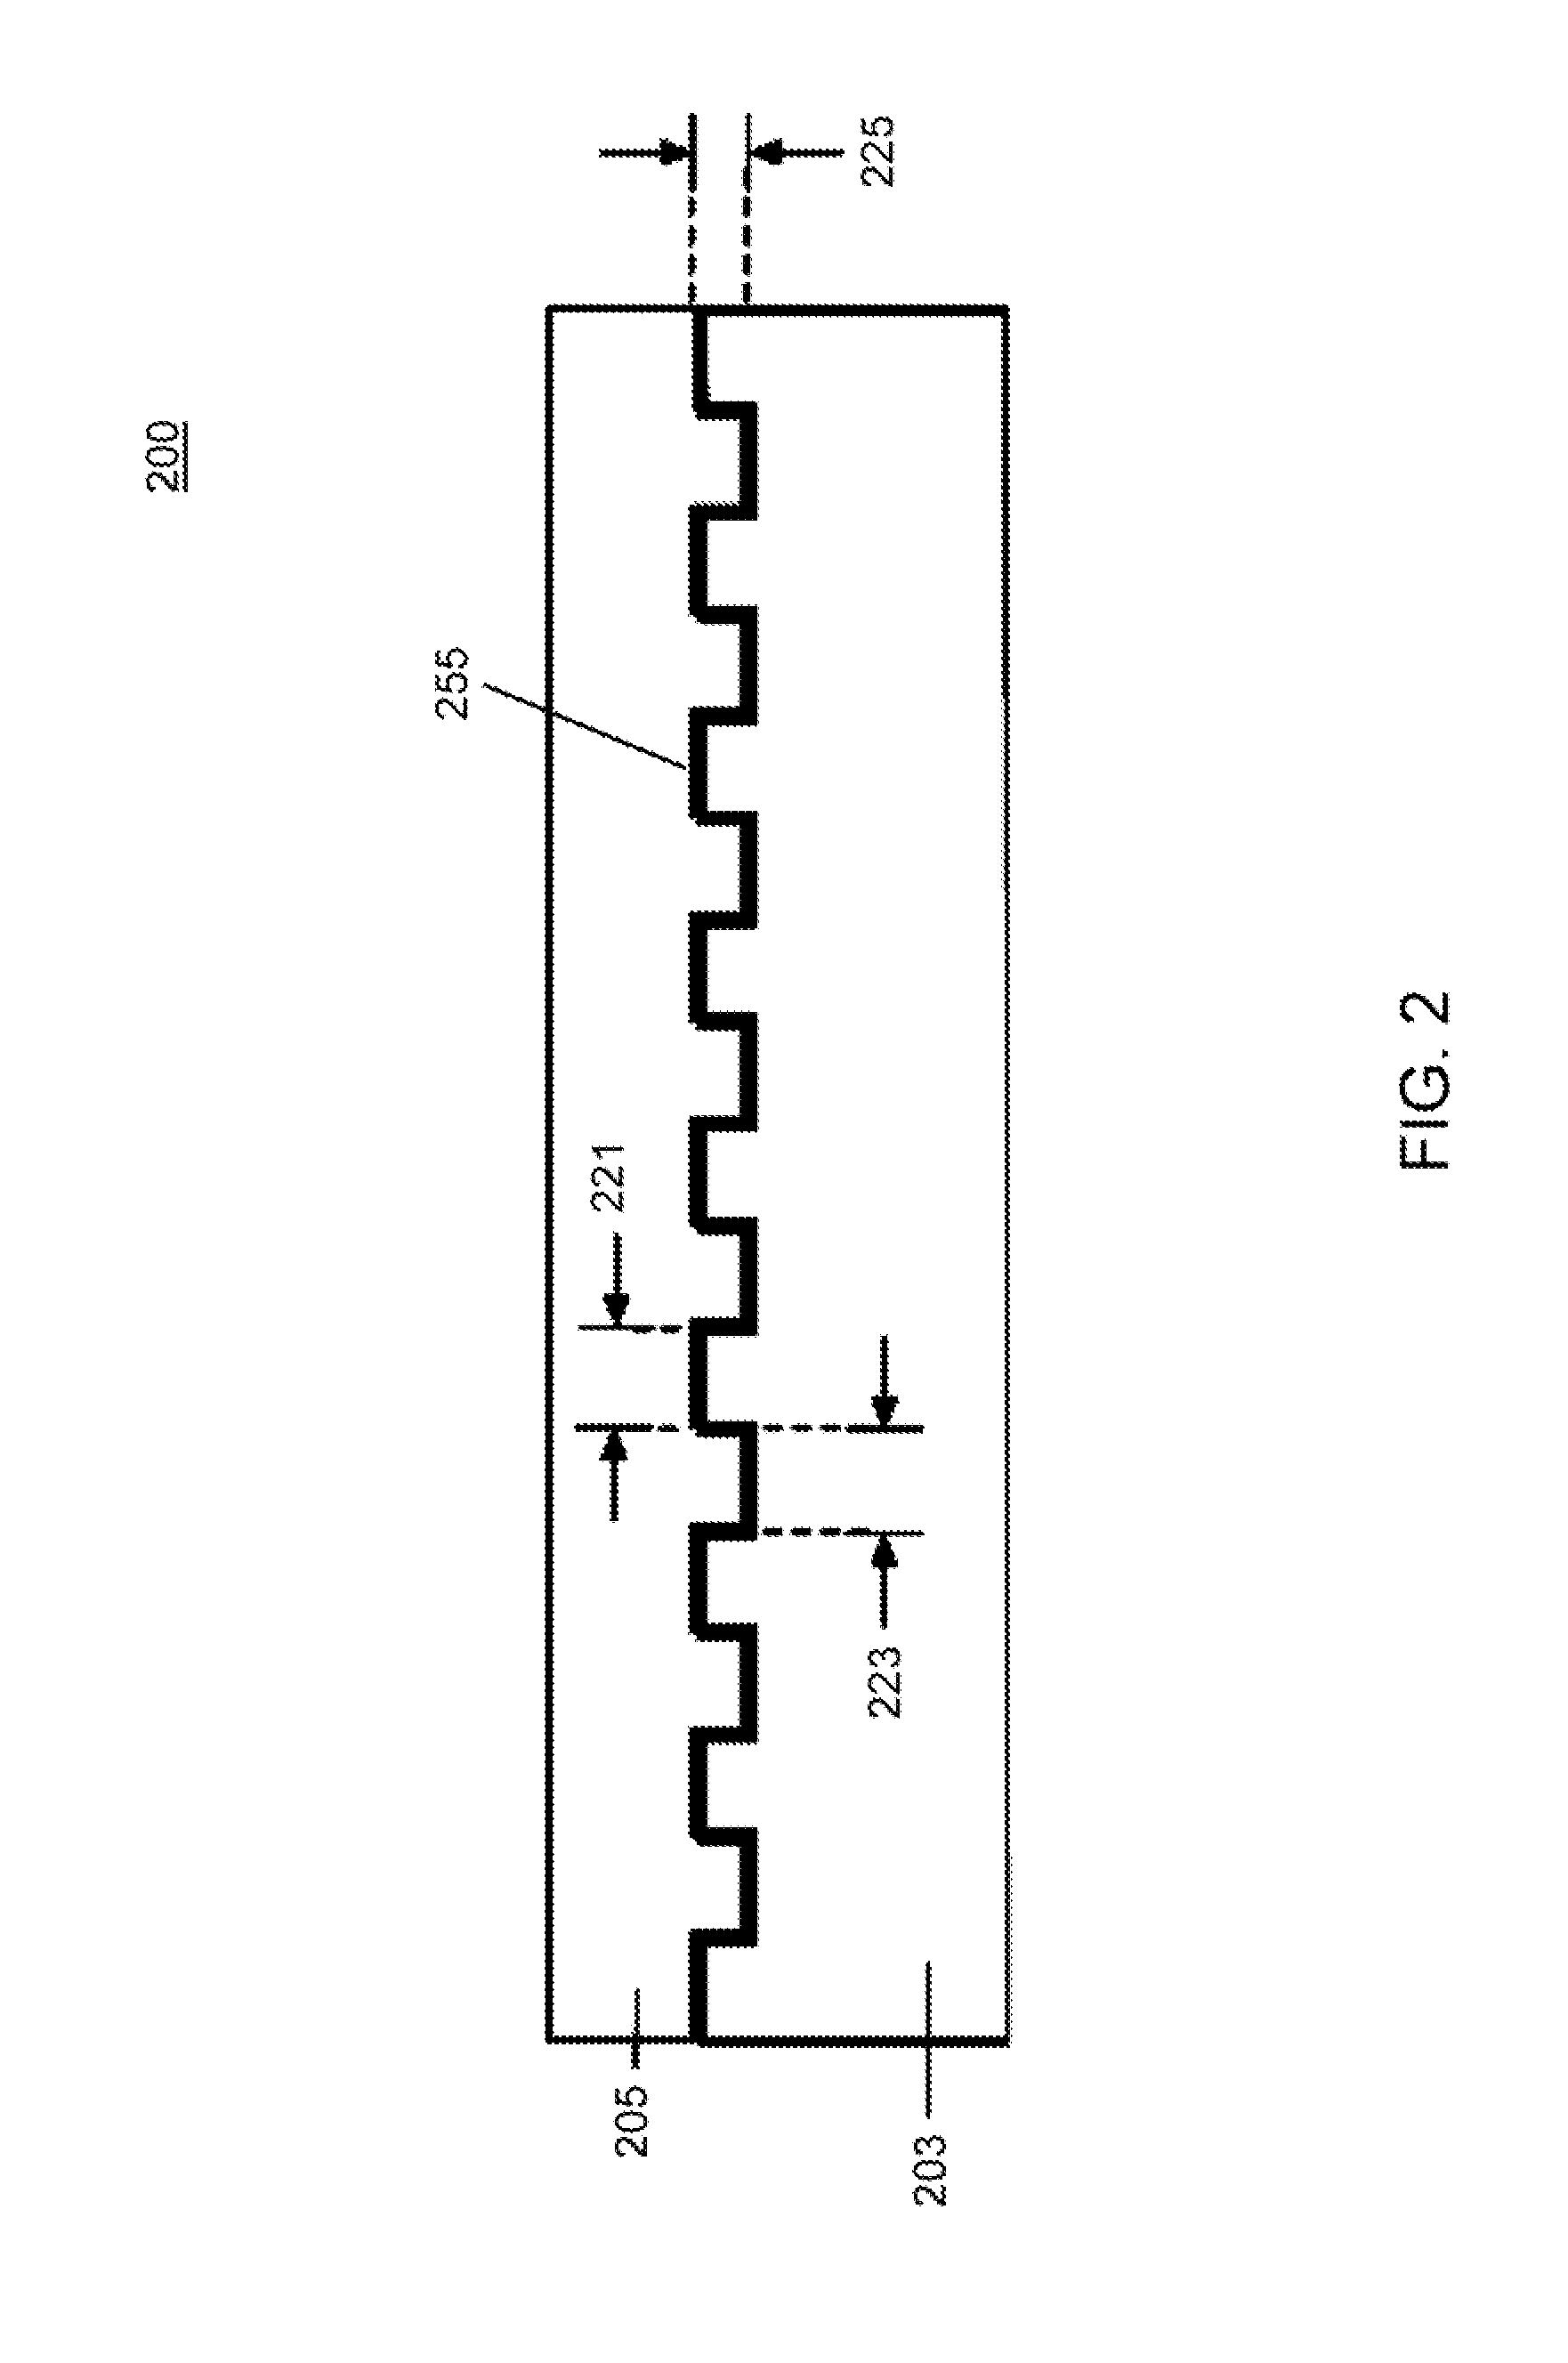 Planar Plasmonic Device for Light Reflection, Diffusion and Guiding